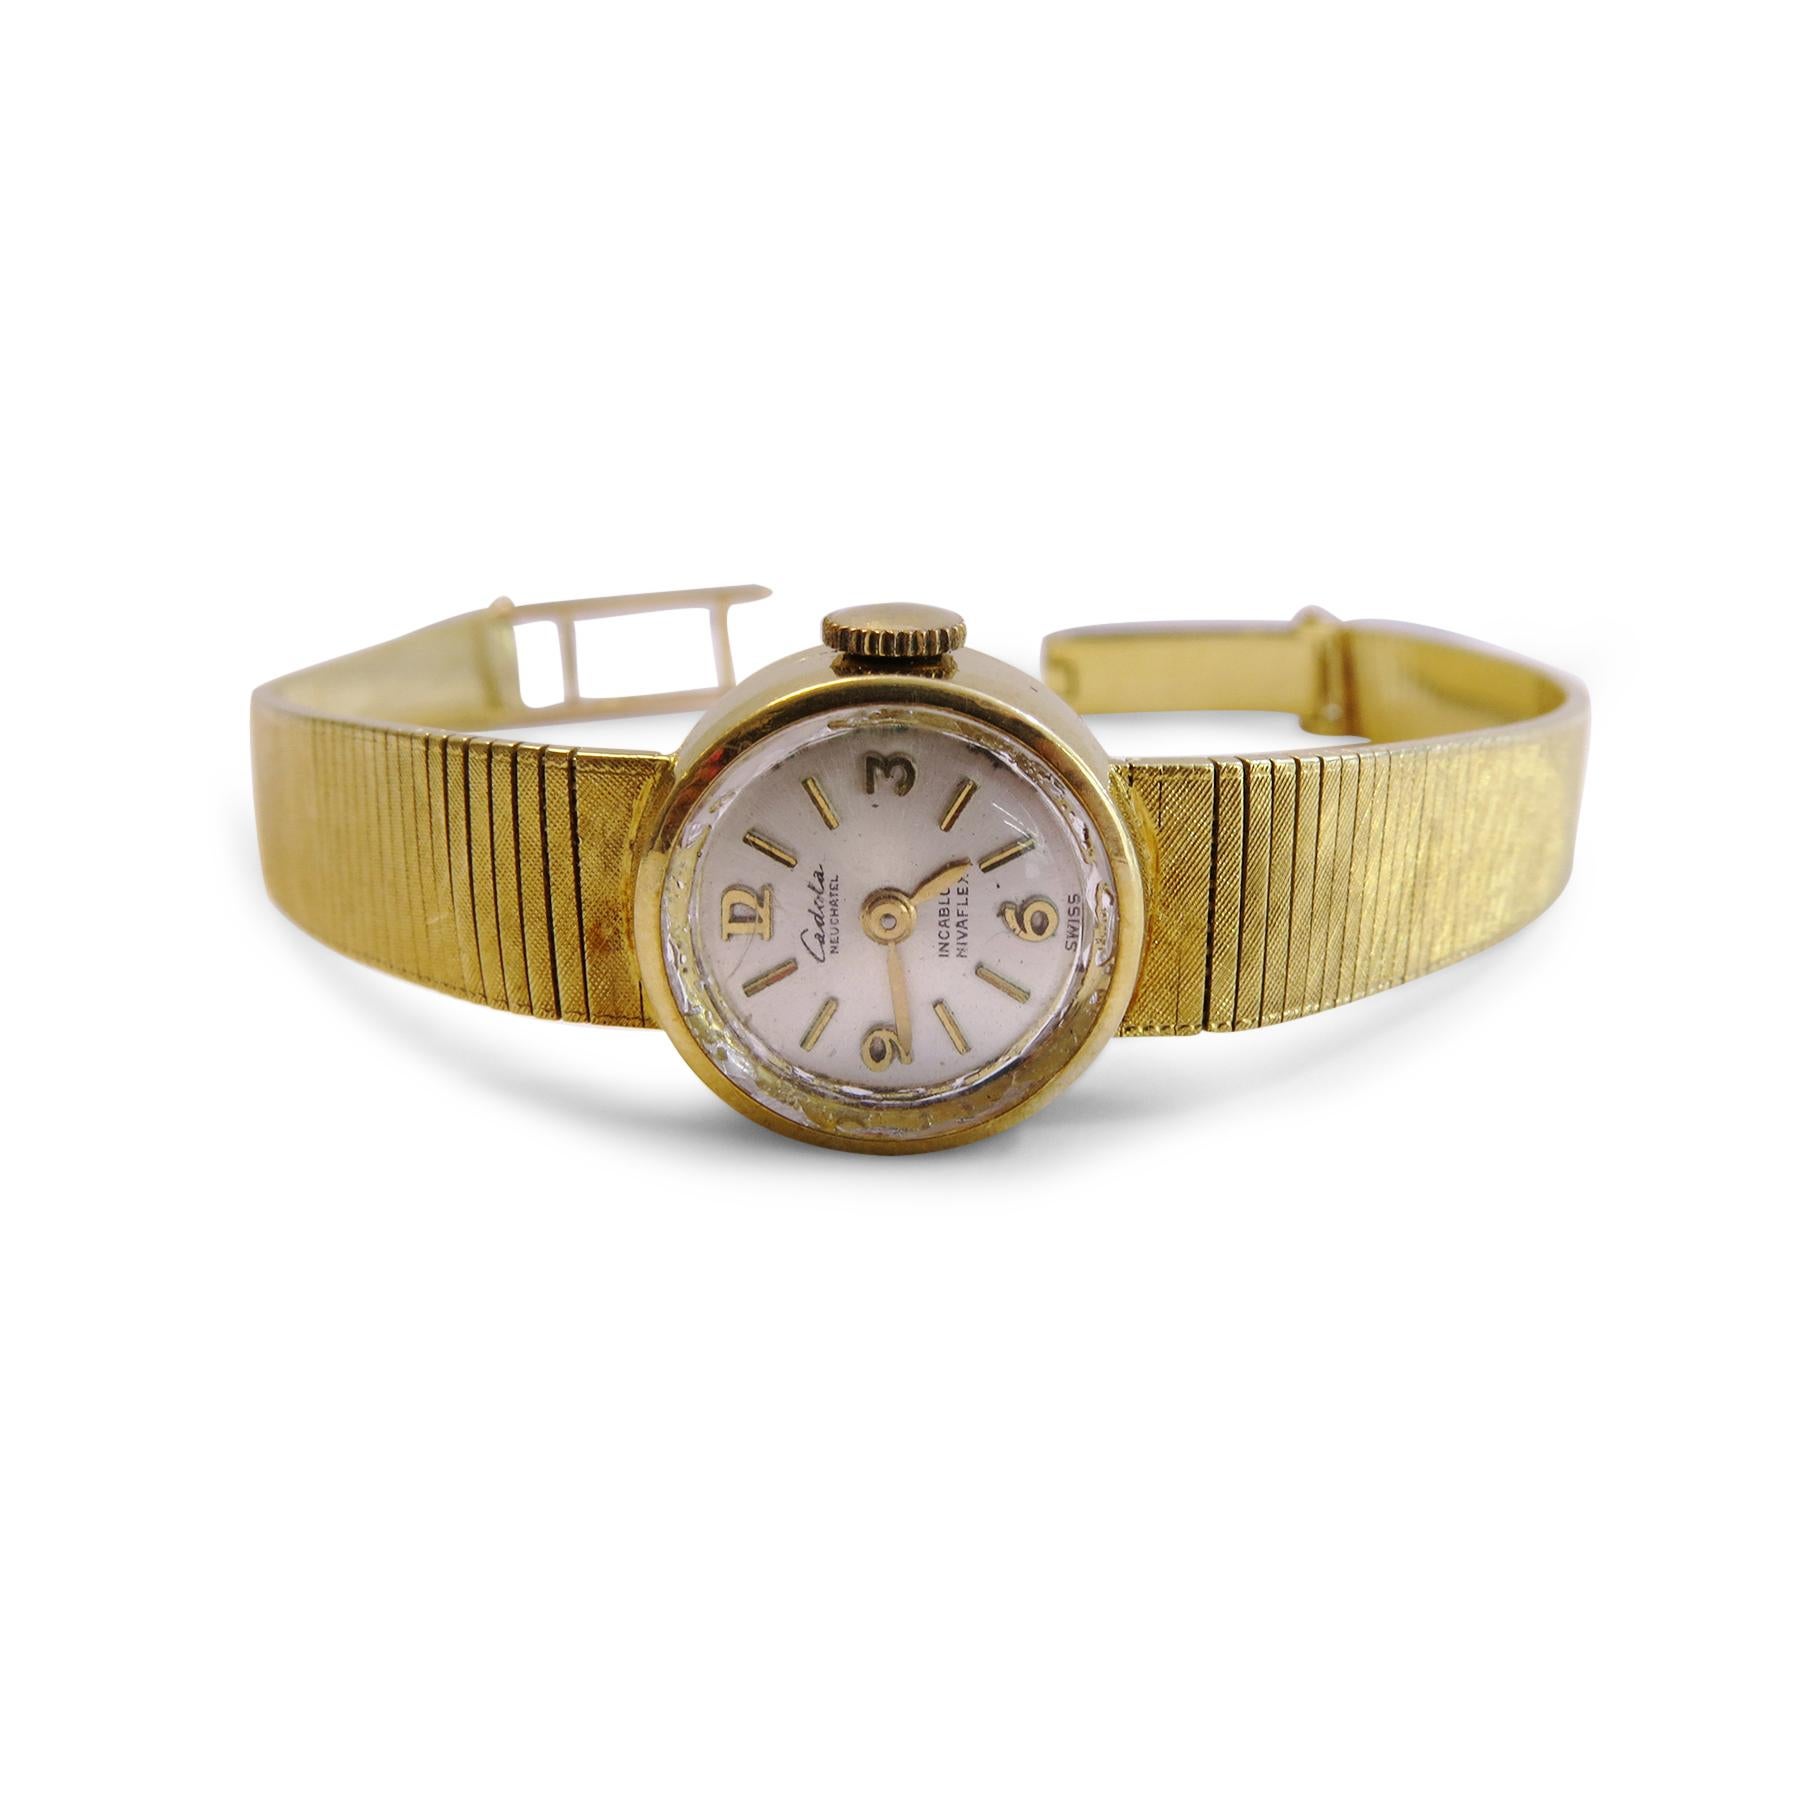 Cadola Neuchatel 
18K Yellow Gold 
Winding 
Swiss 
Size= 7 inches 
Dial Diameter= 16mm
Band= 7mm
Weigh= 23gr 